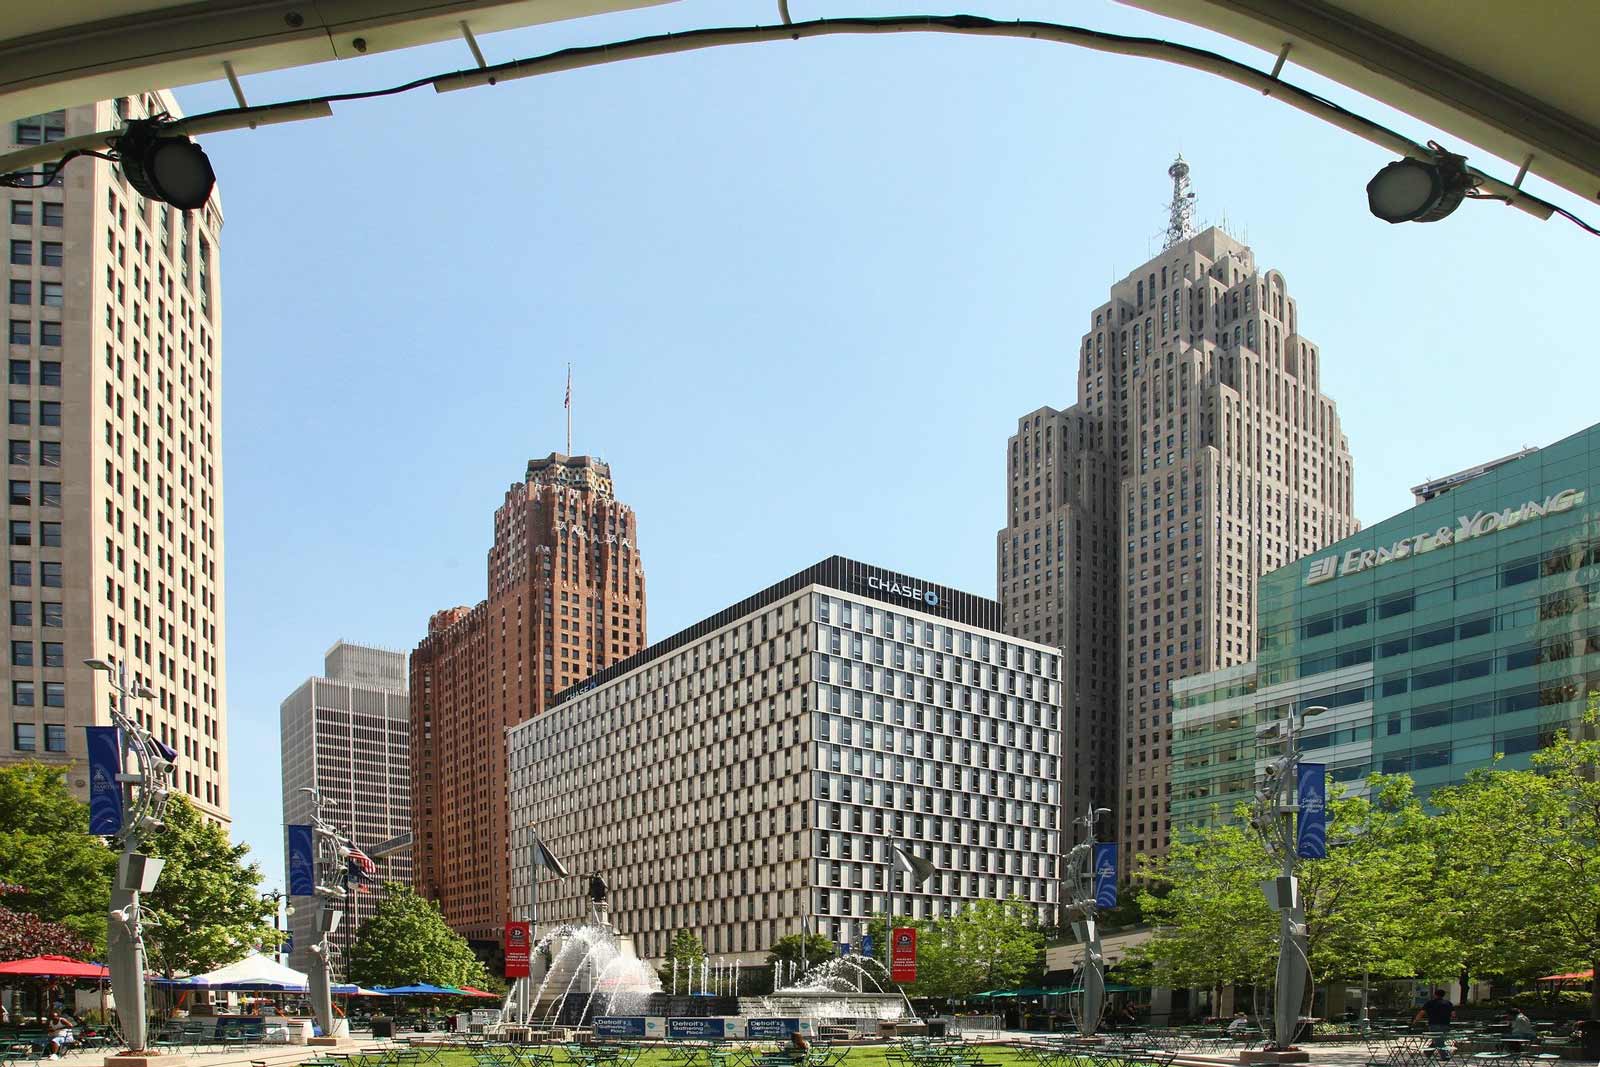 Campus Martius Park things to do in Detroit Michigan